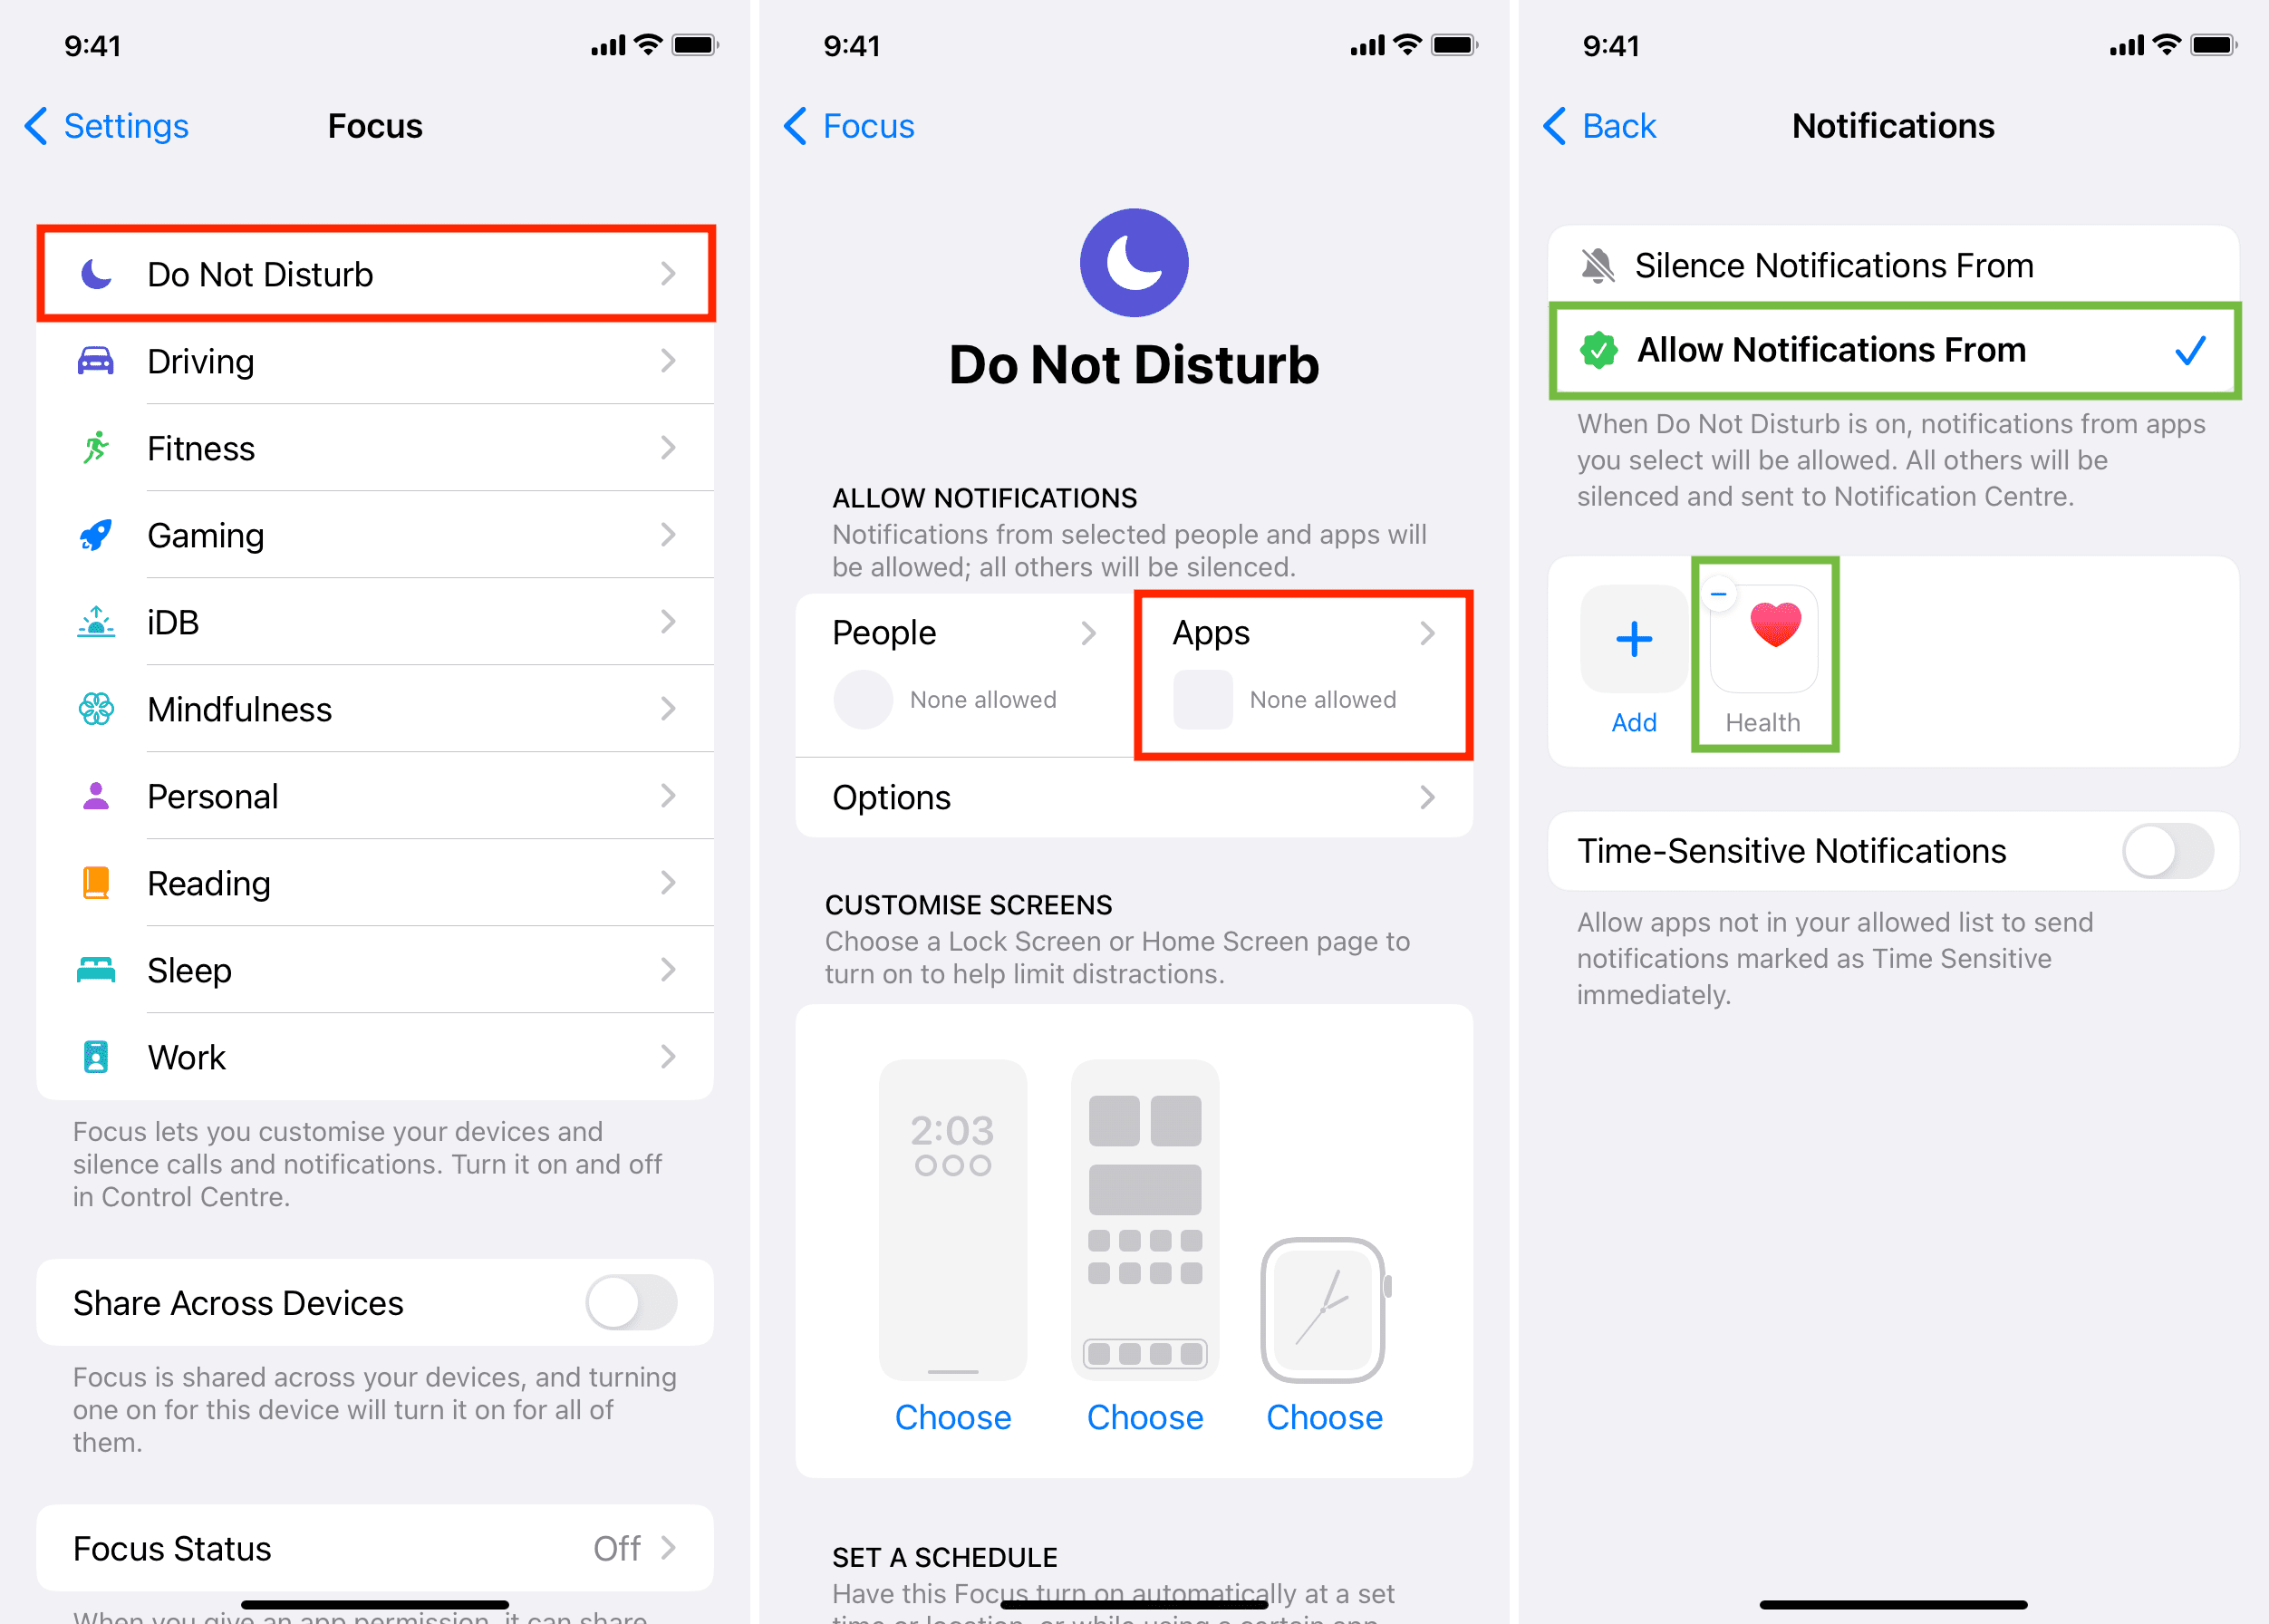 Add Health app to send notifications during Focus